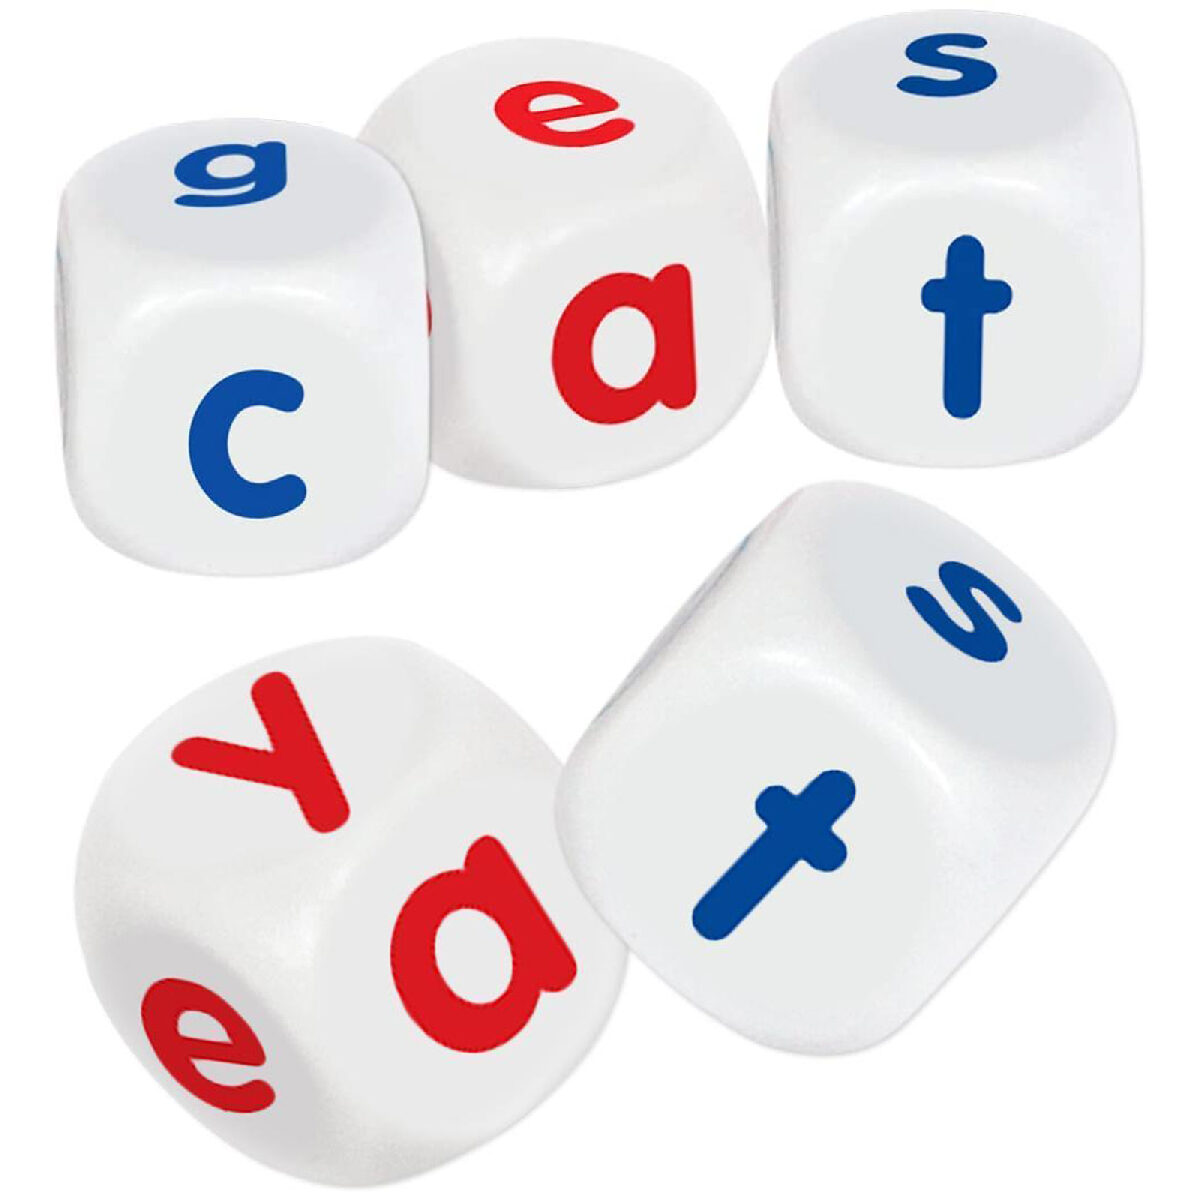 Roll A Word (Junior Learning Inc) is a dice game for building words.